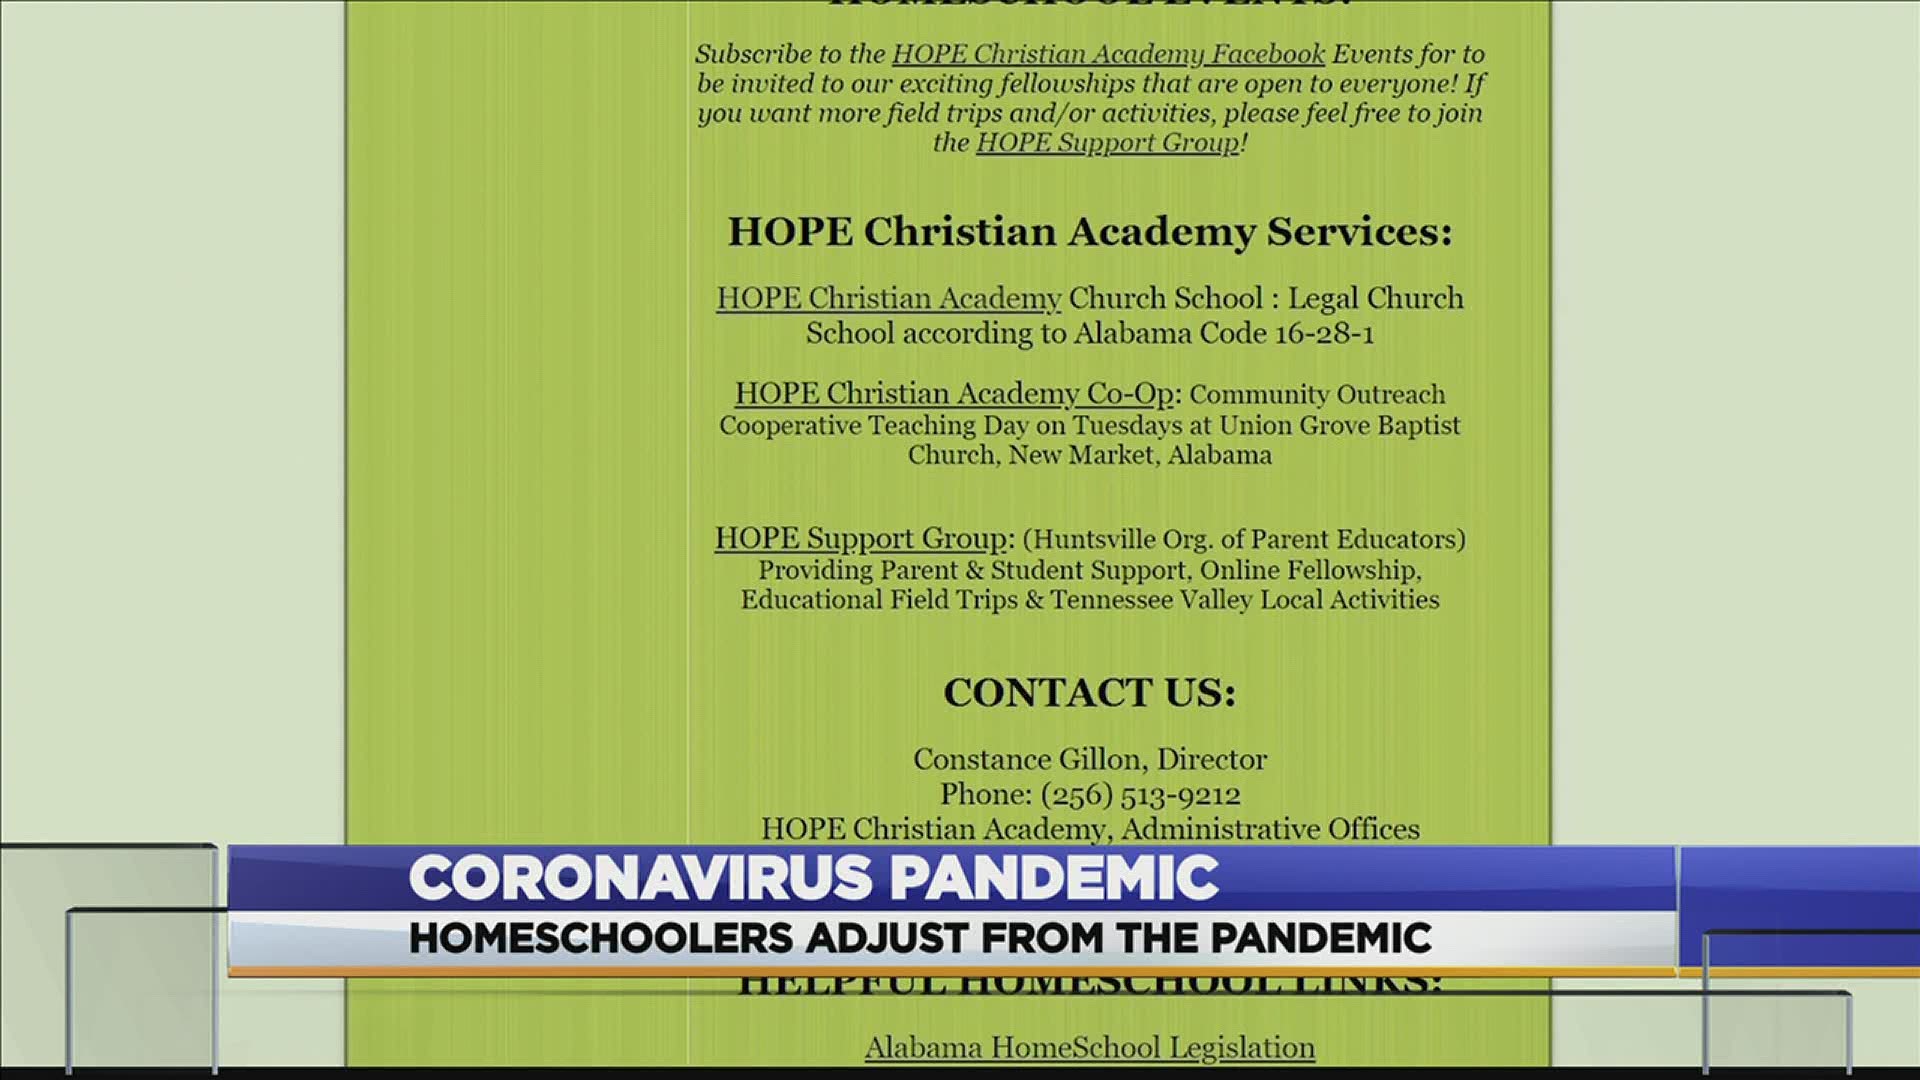 The HOPE Christian Academy said its seeing an increase in families turning to home schooling during COVID-19.